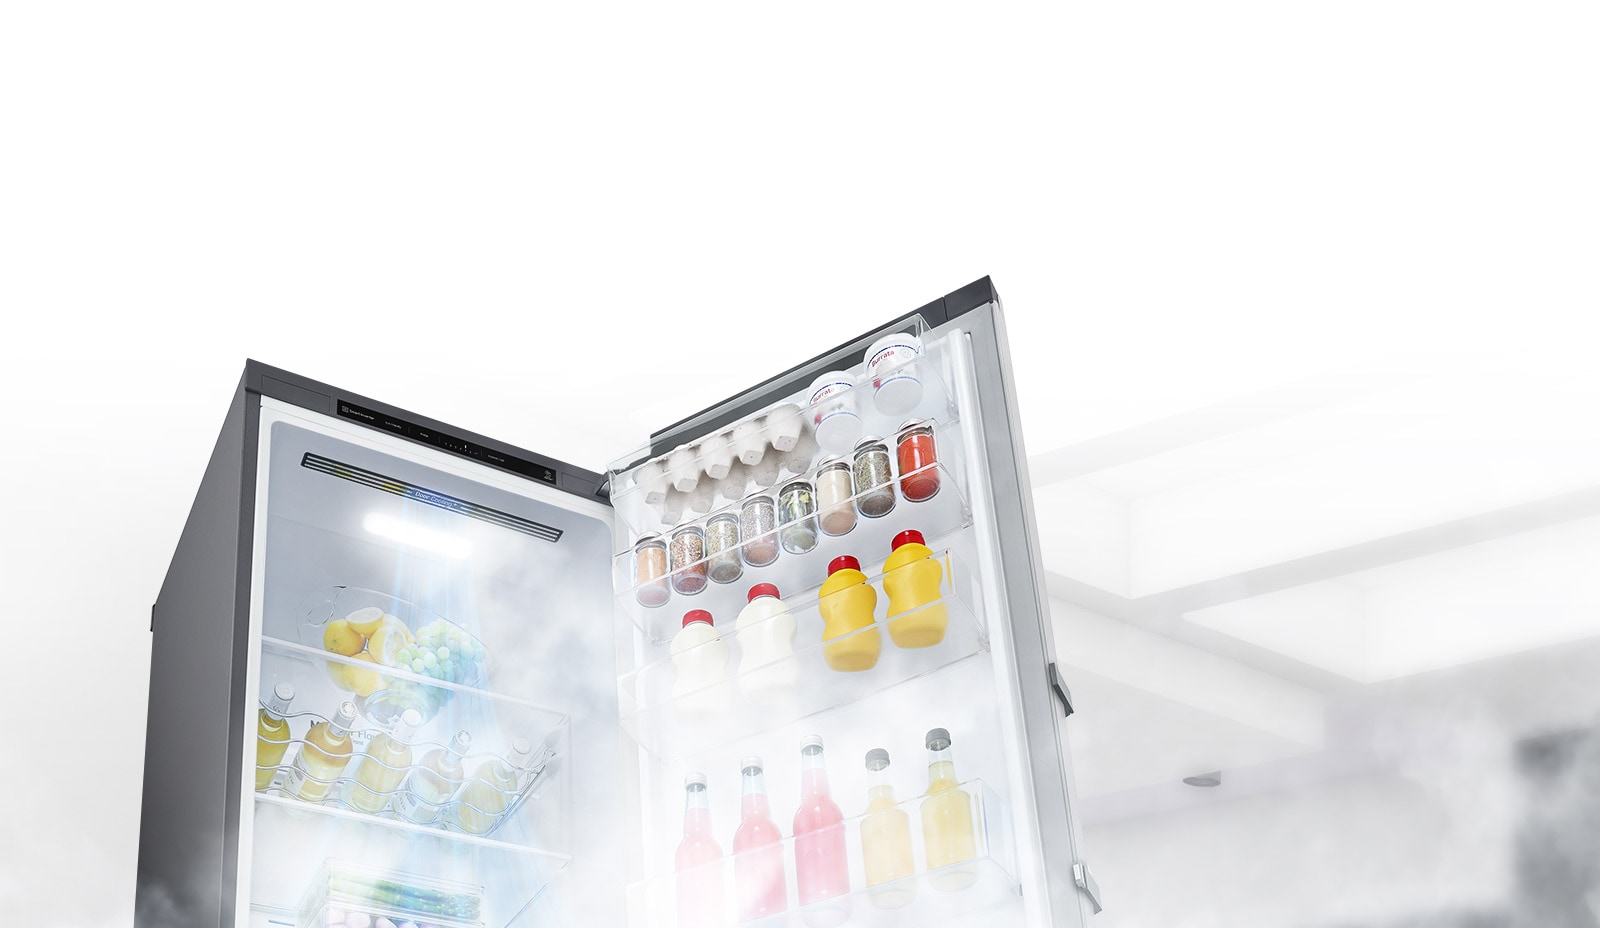 The refrigerator is shown open at an angle and filled with produce. White air is blowing from the top of the interior down around all of the food to keep it cool.